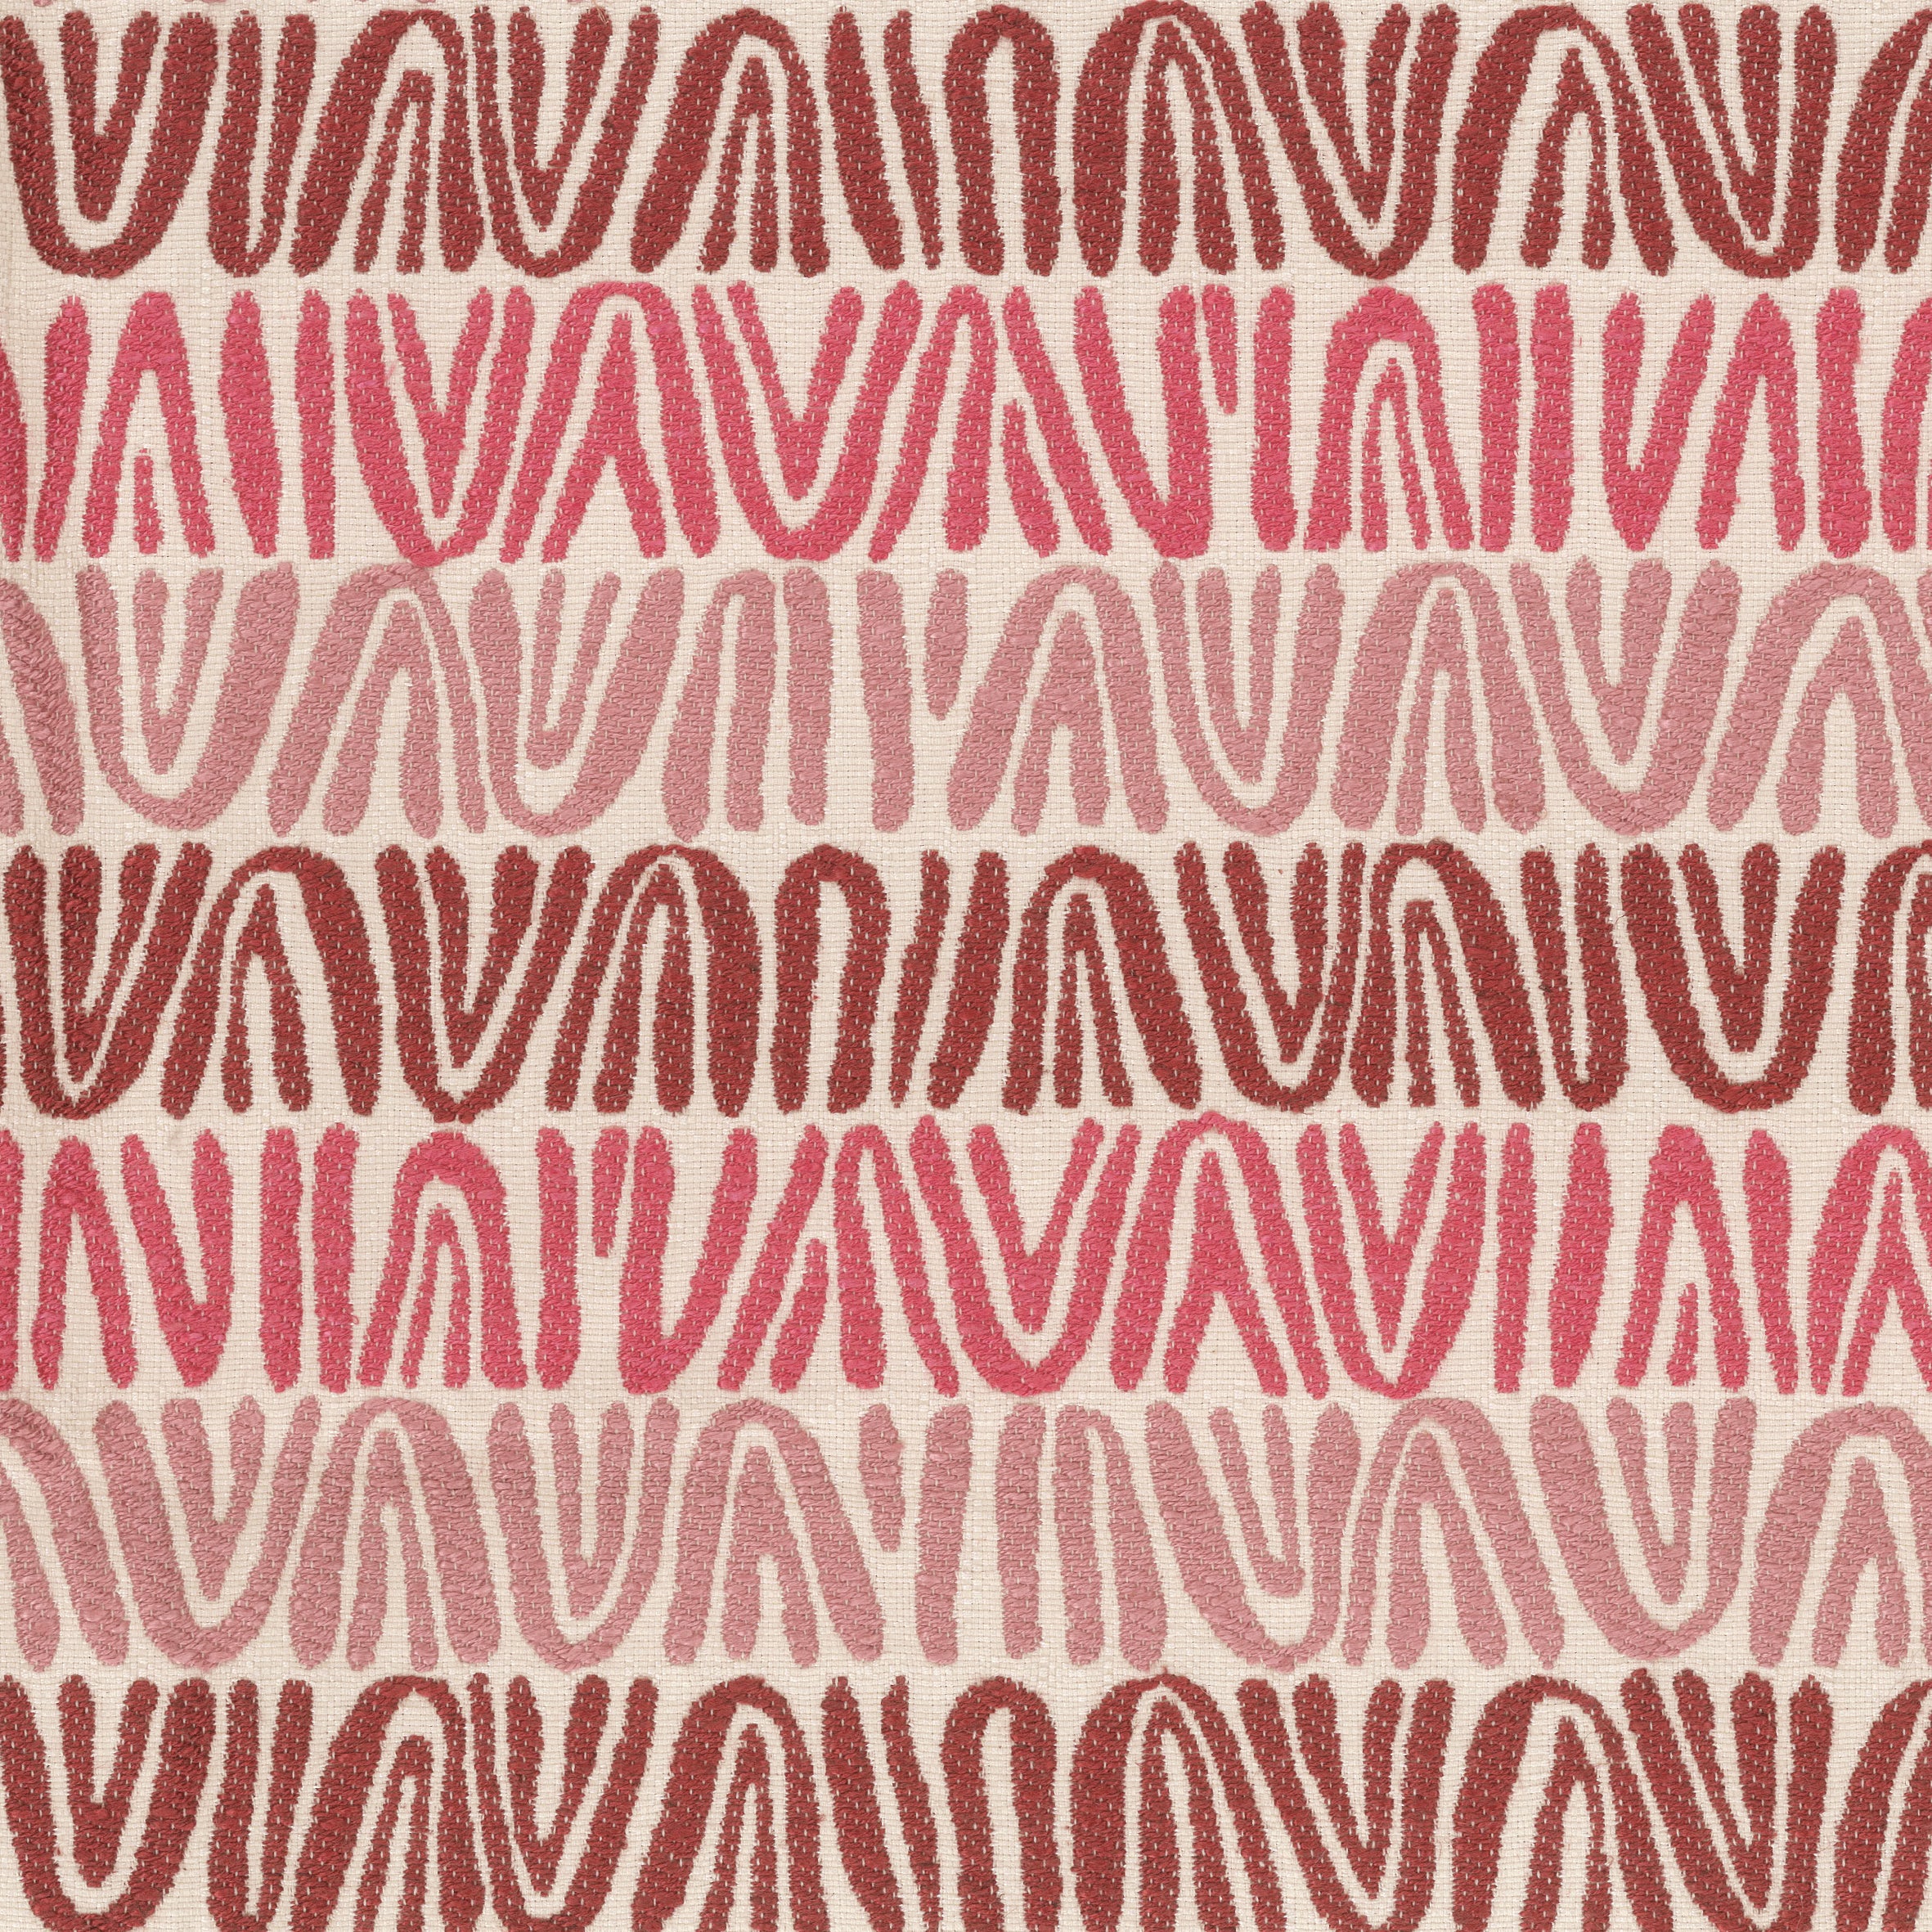 Nina Campbell Fabric - Dallimore Weaves Appledore Claret/Red/Pink NCF4520-03